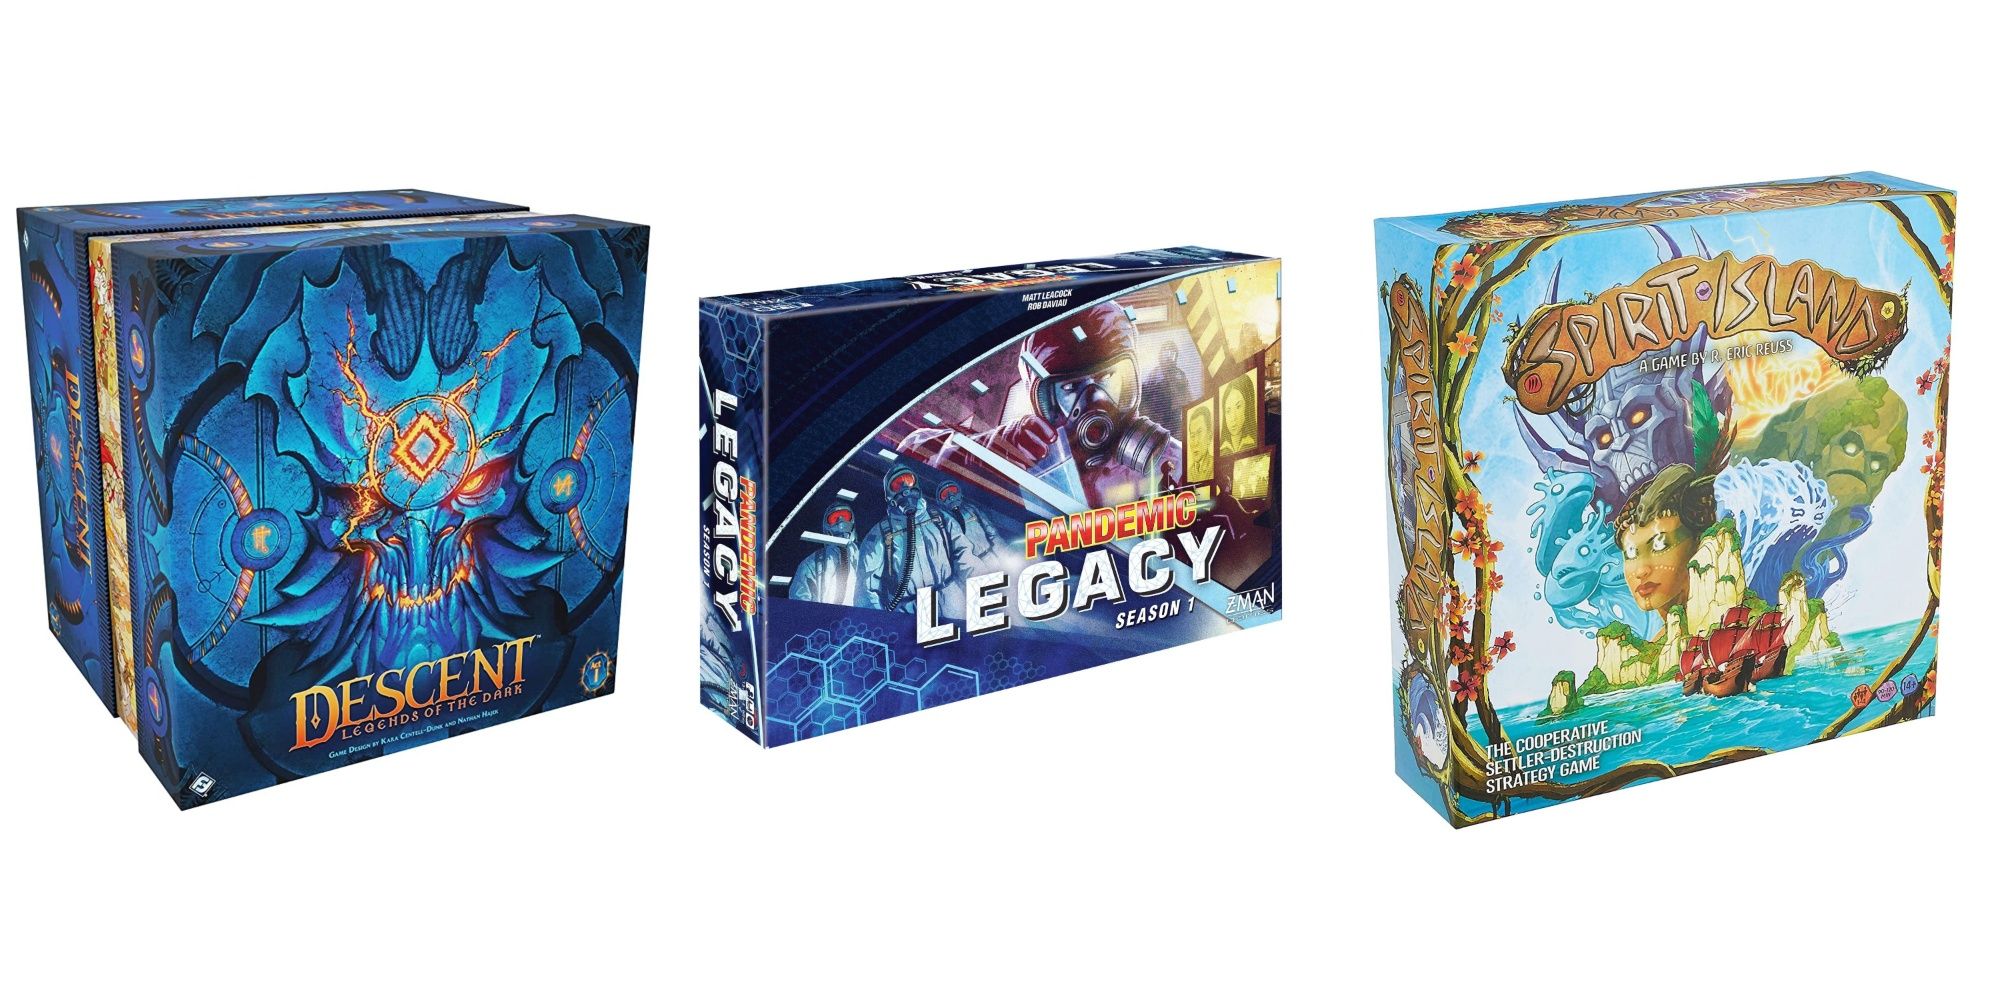 Cooperative board games featuring Descent: Legends of the Dark, Pandemic Legacy: Season 1, and Spirit Island